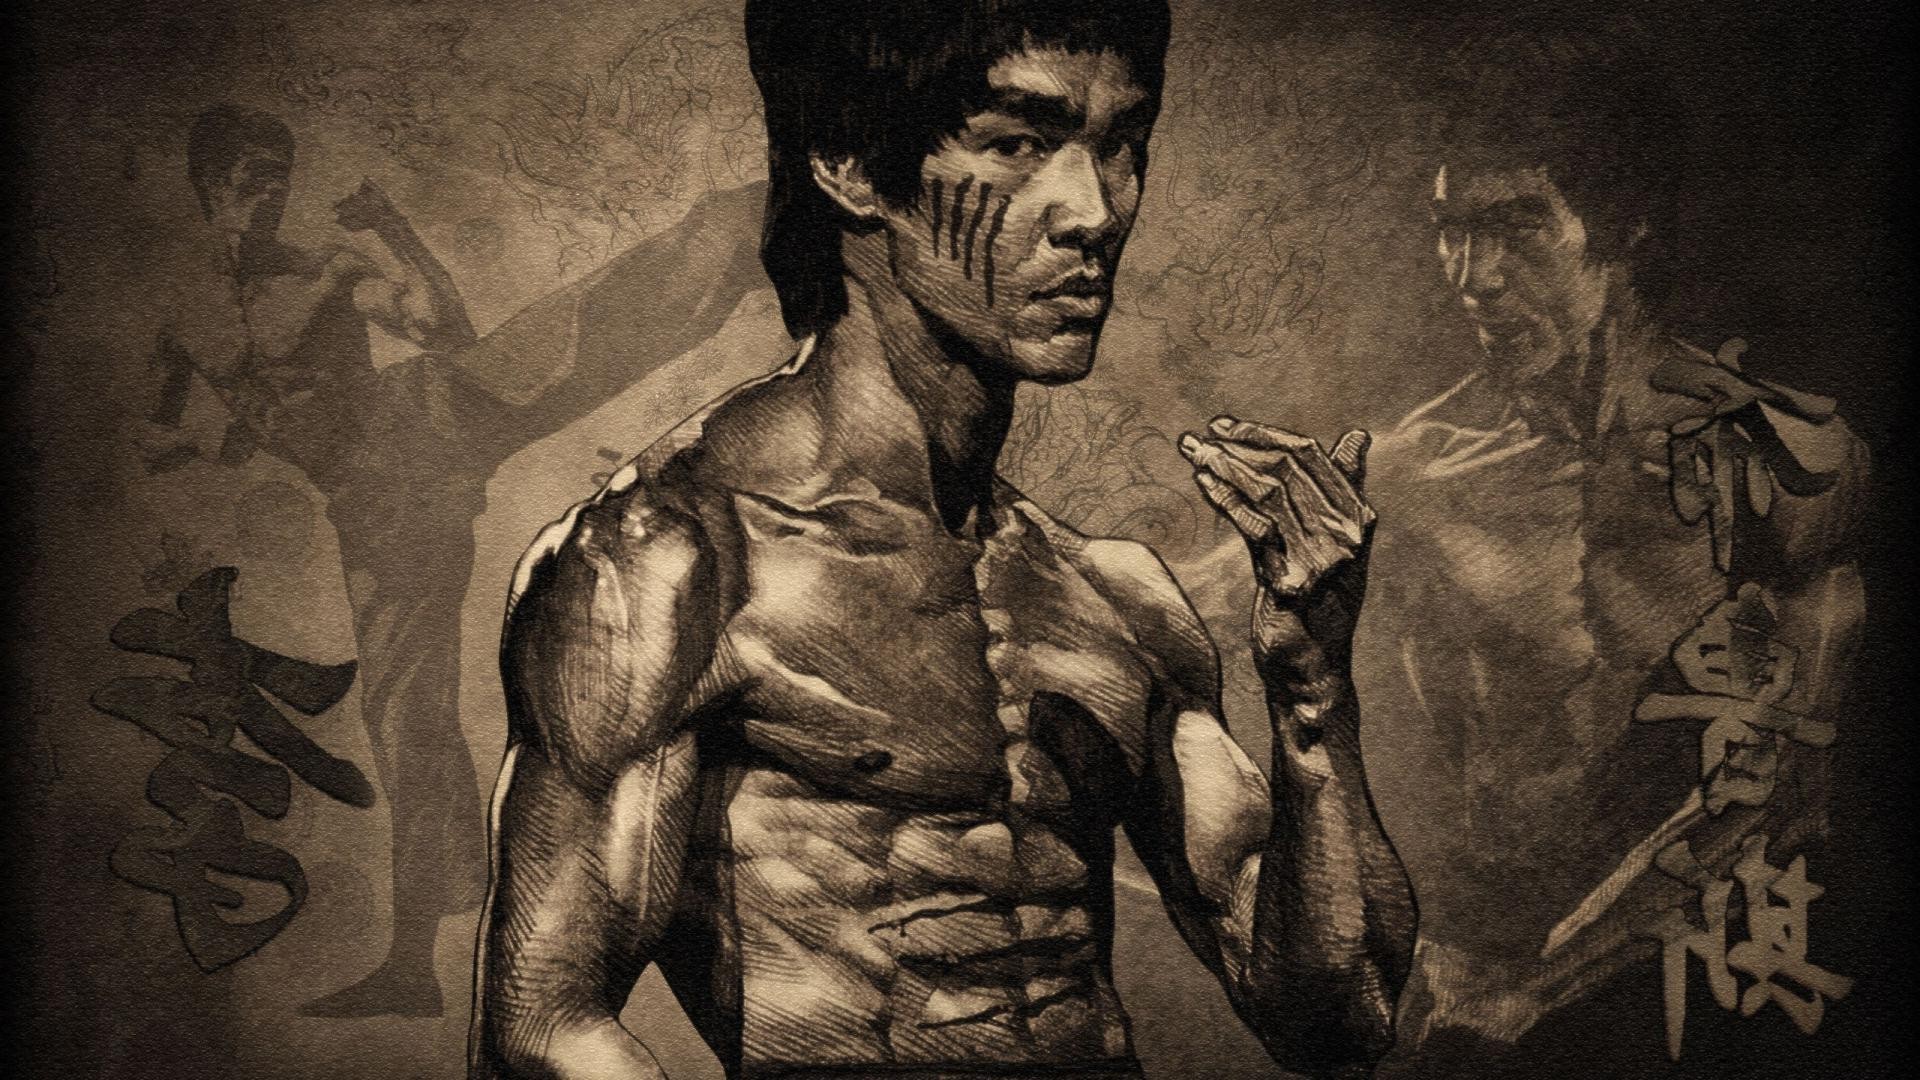 Bruce Lee Wallpapers HD A13